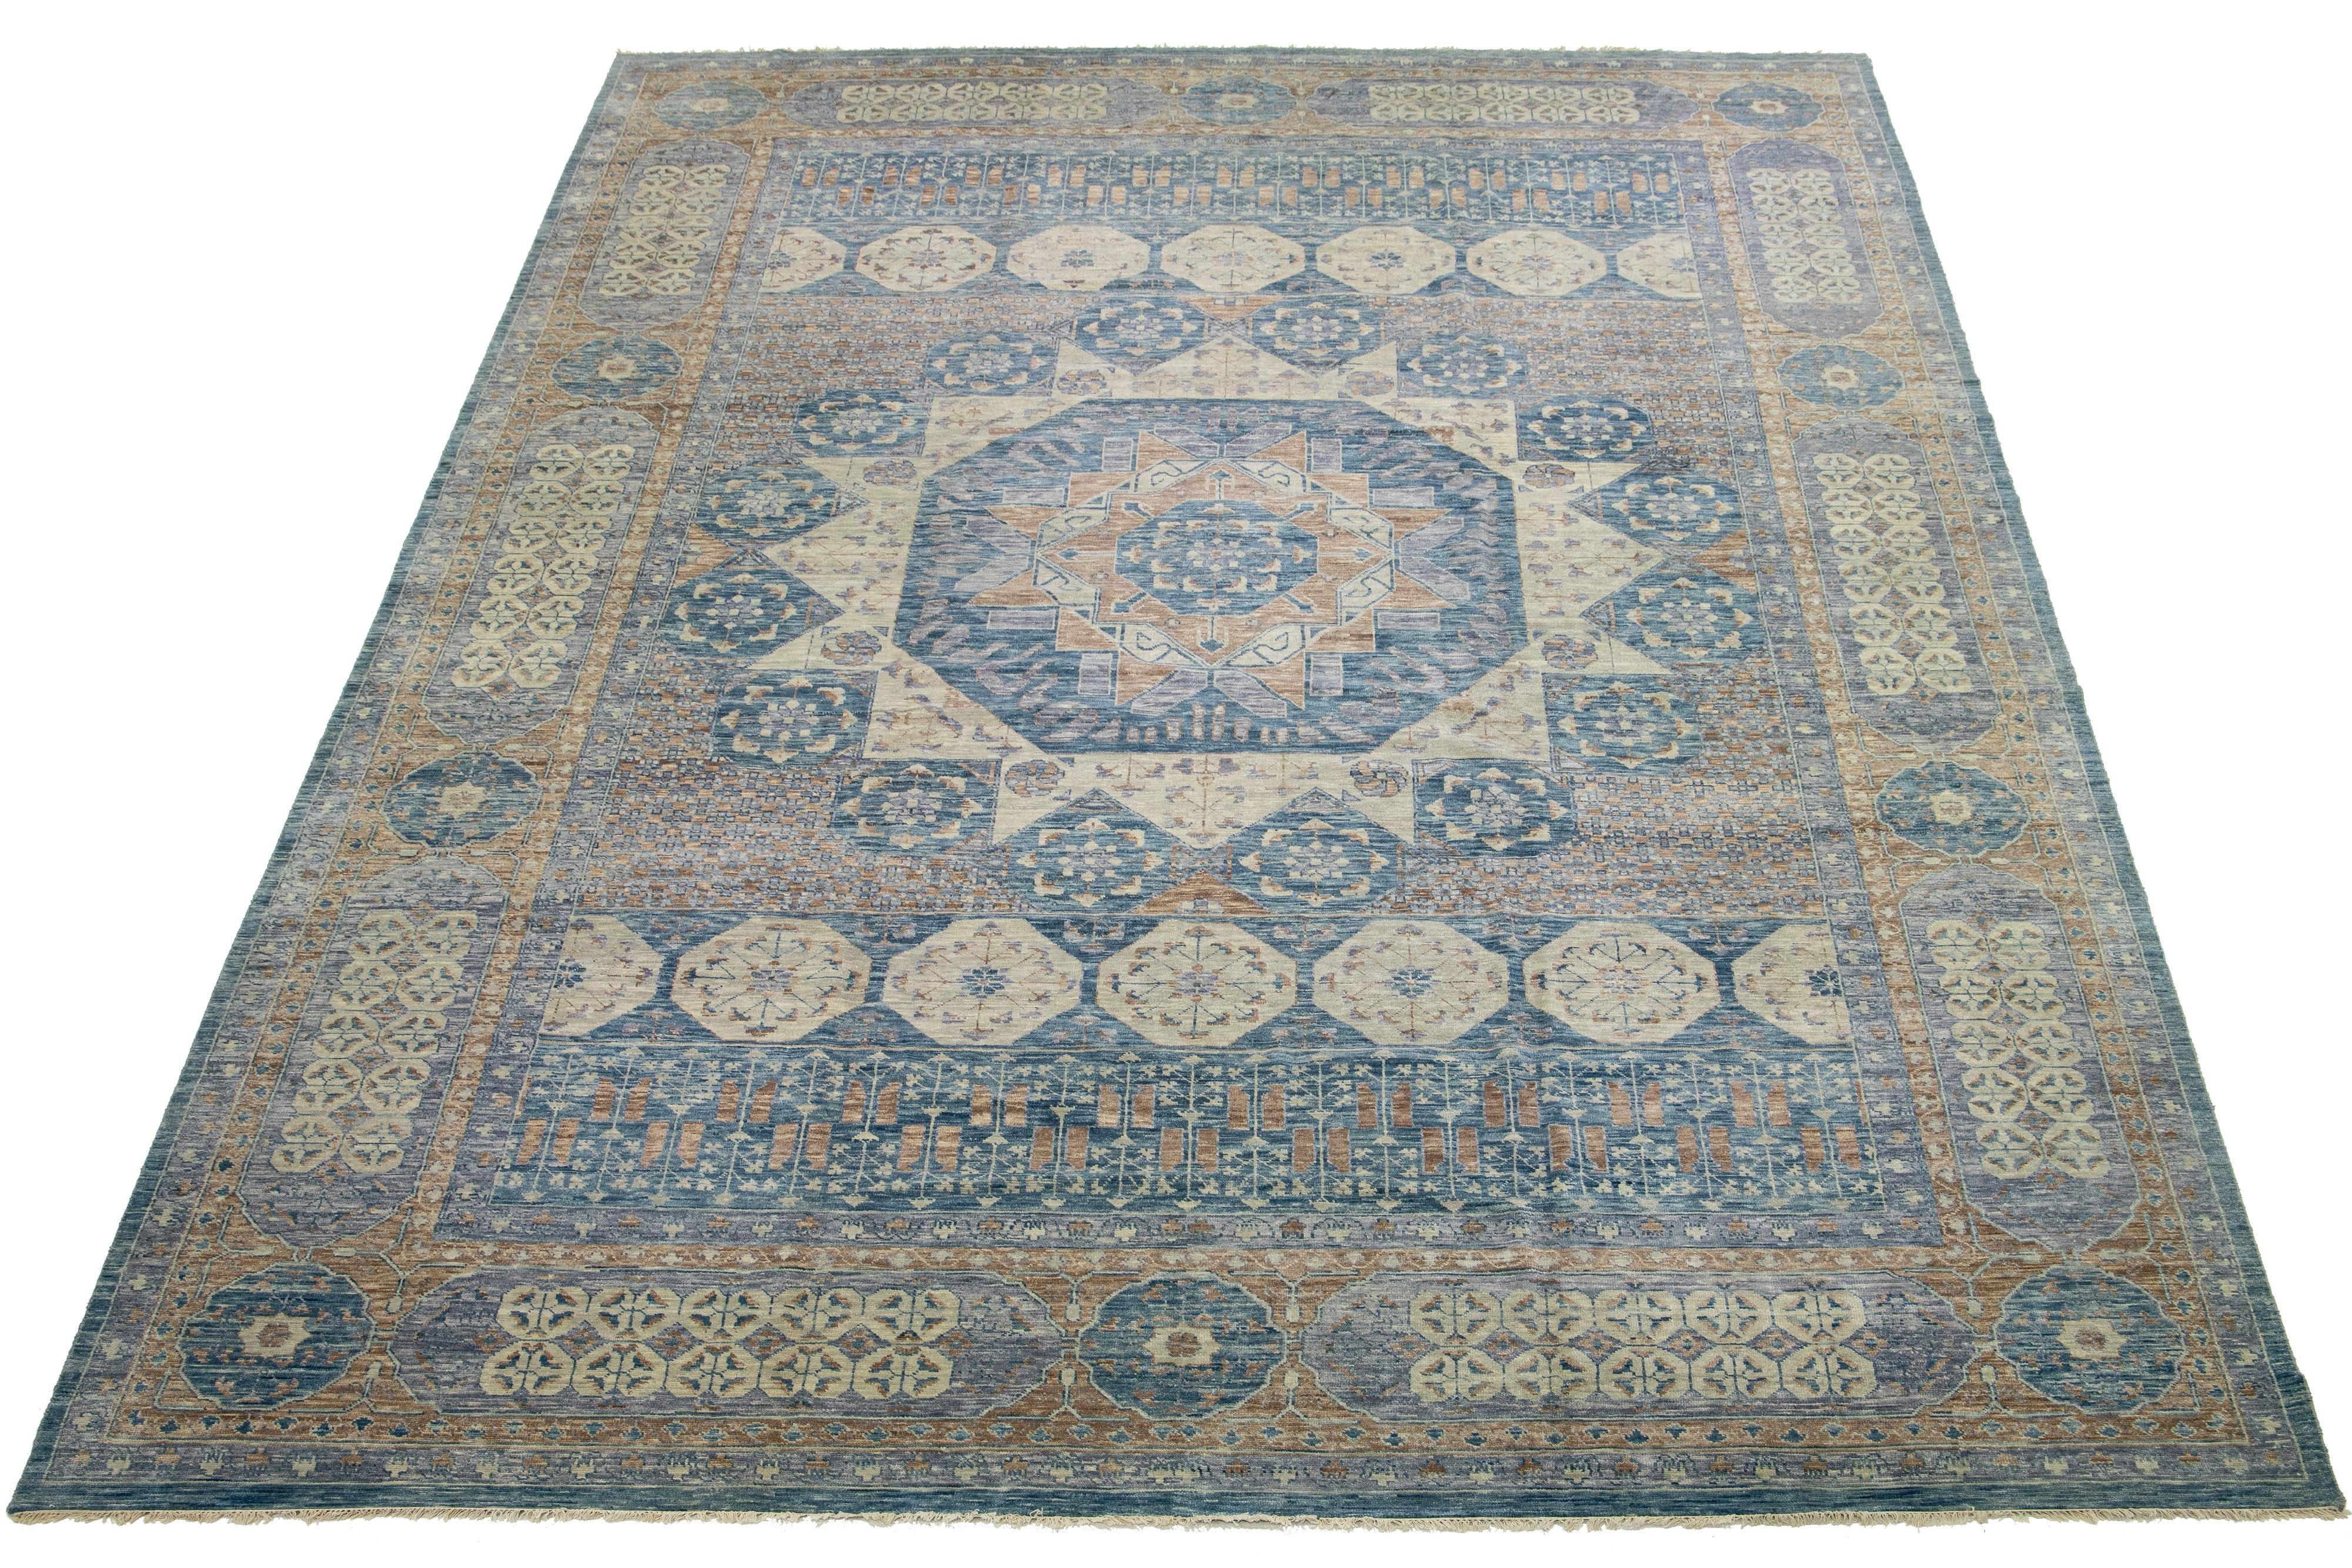 A Mamluk wool rug in a gray field with allover floral designs. This hand-knotted modern piece has blue and beige accents that complement the design.

This rug measures 16'7